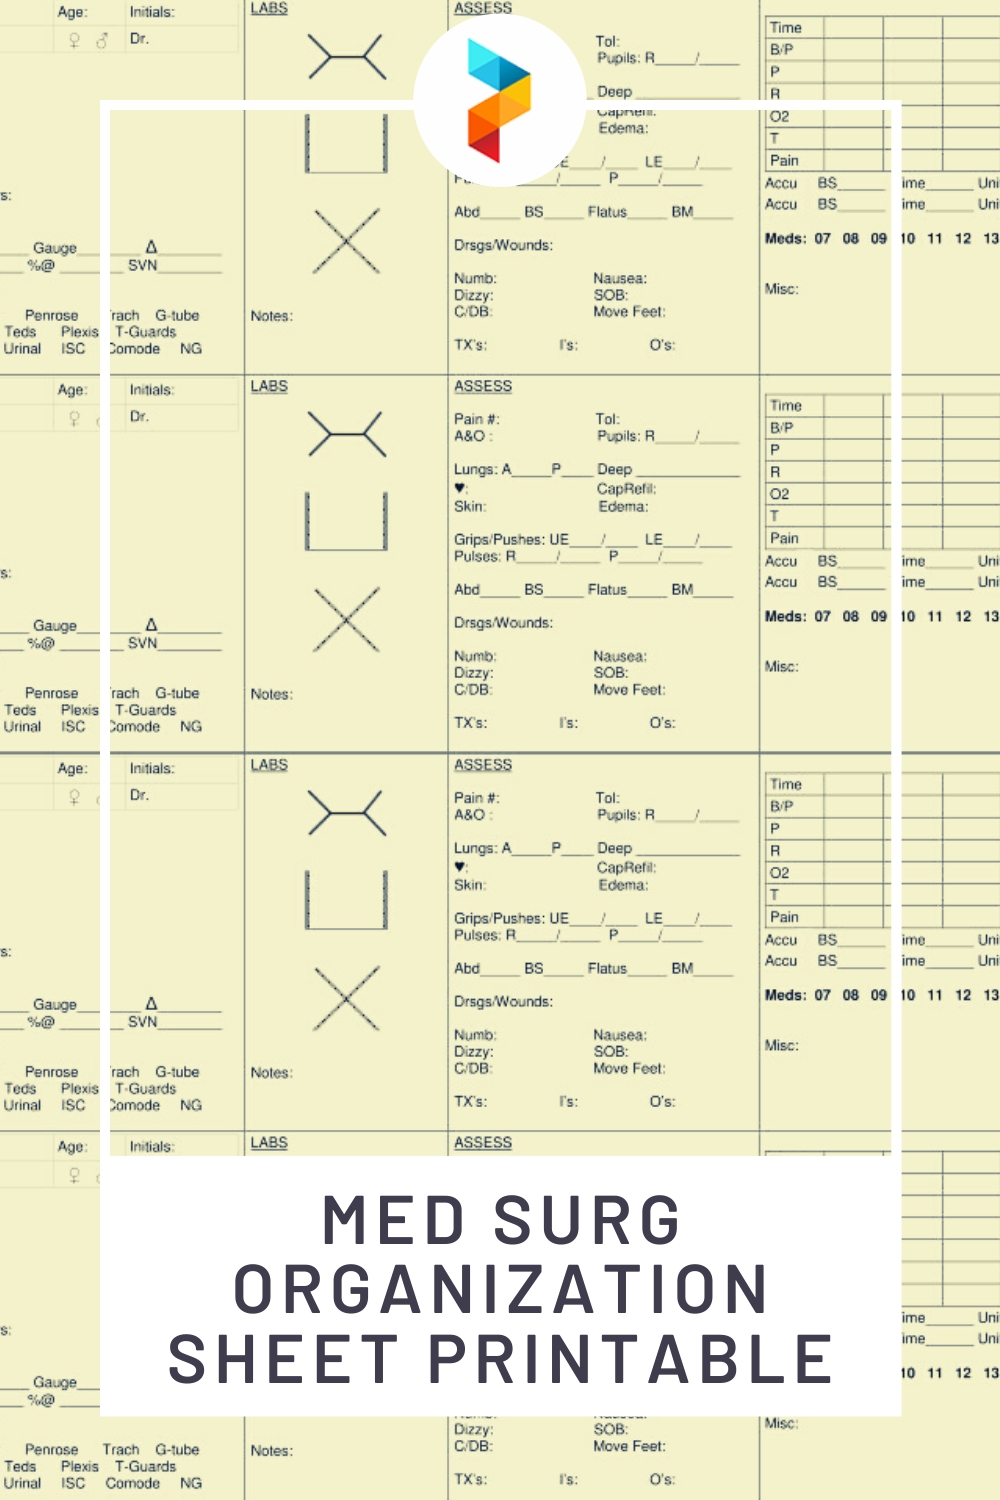 Med Surg Report Sheet Templates within Med Surg Report Sheet Templates